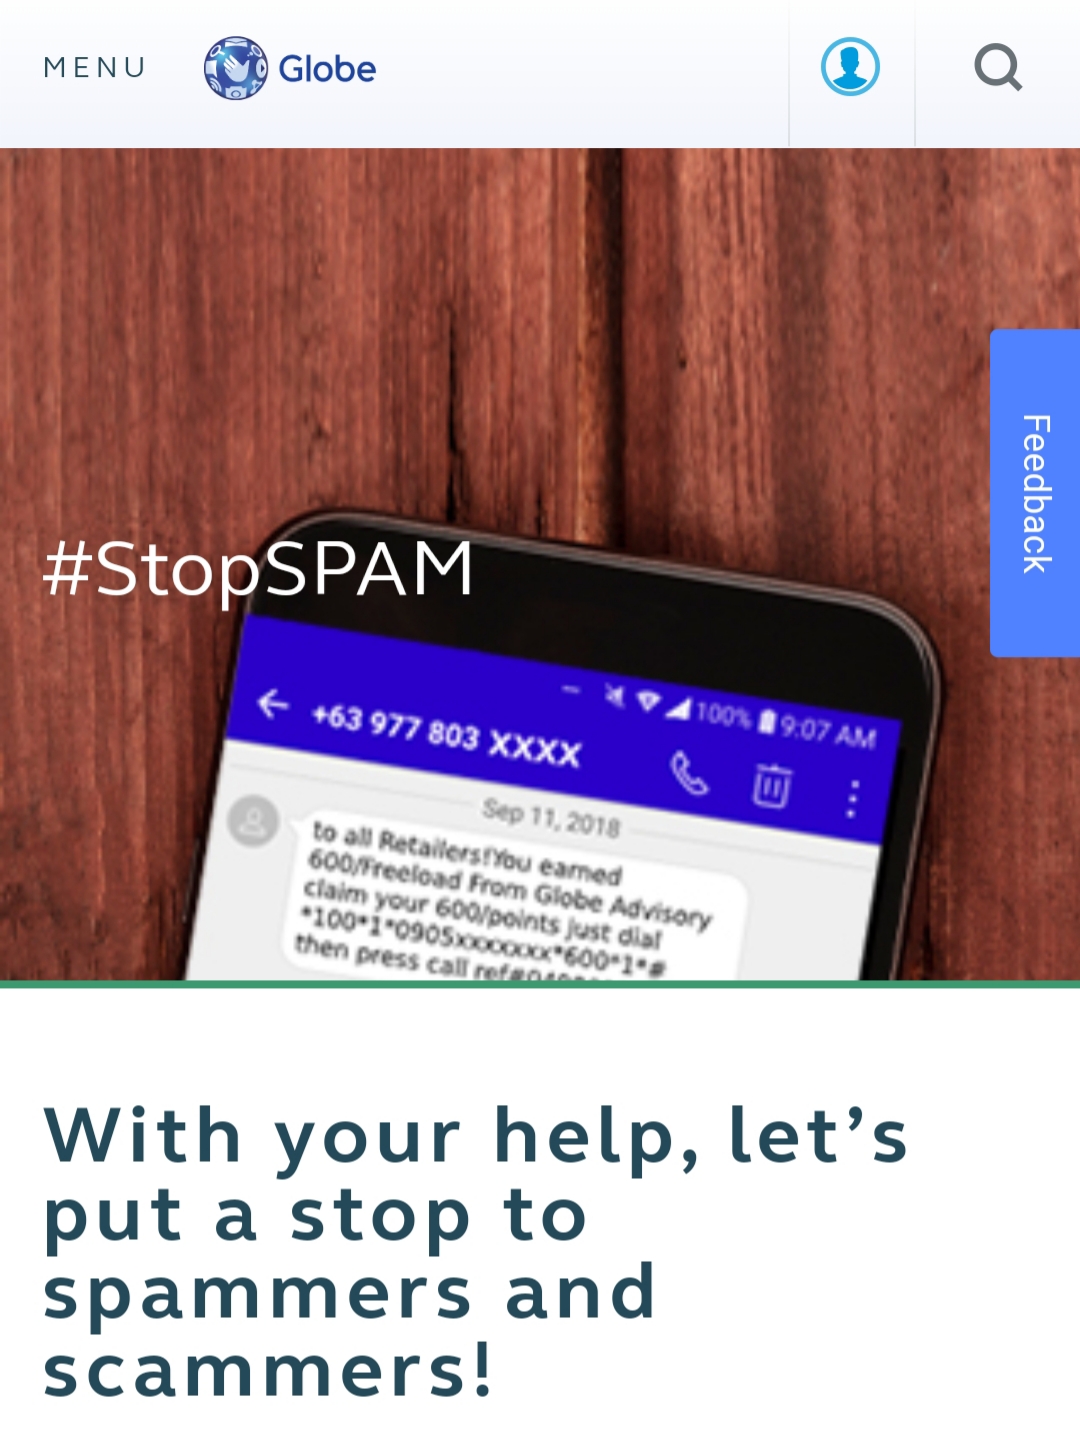 Globe urges customers to use reporting tool for spam/scam cases